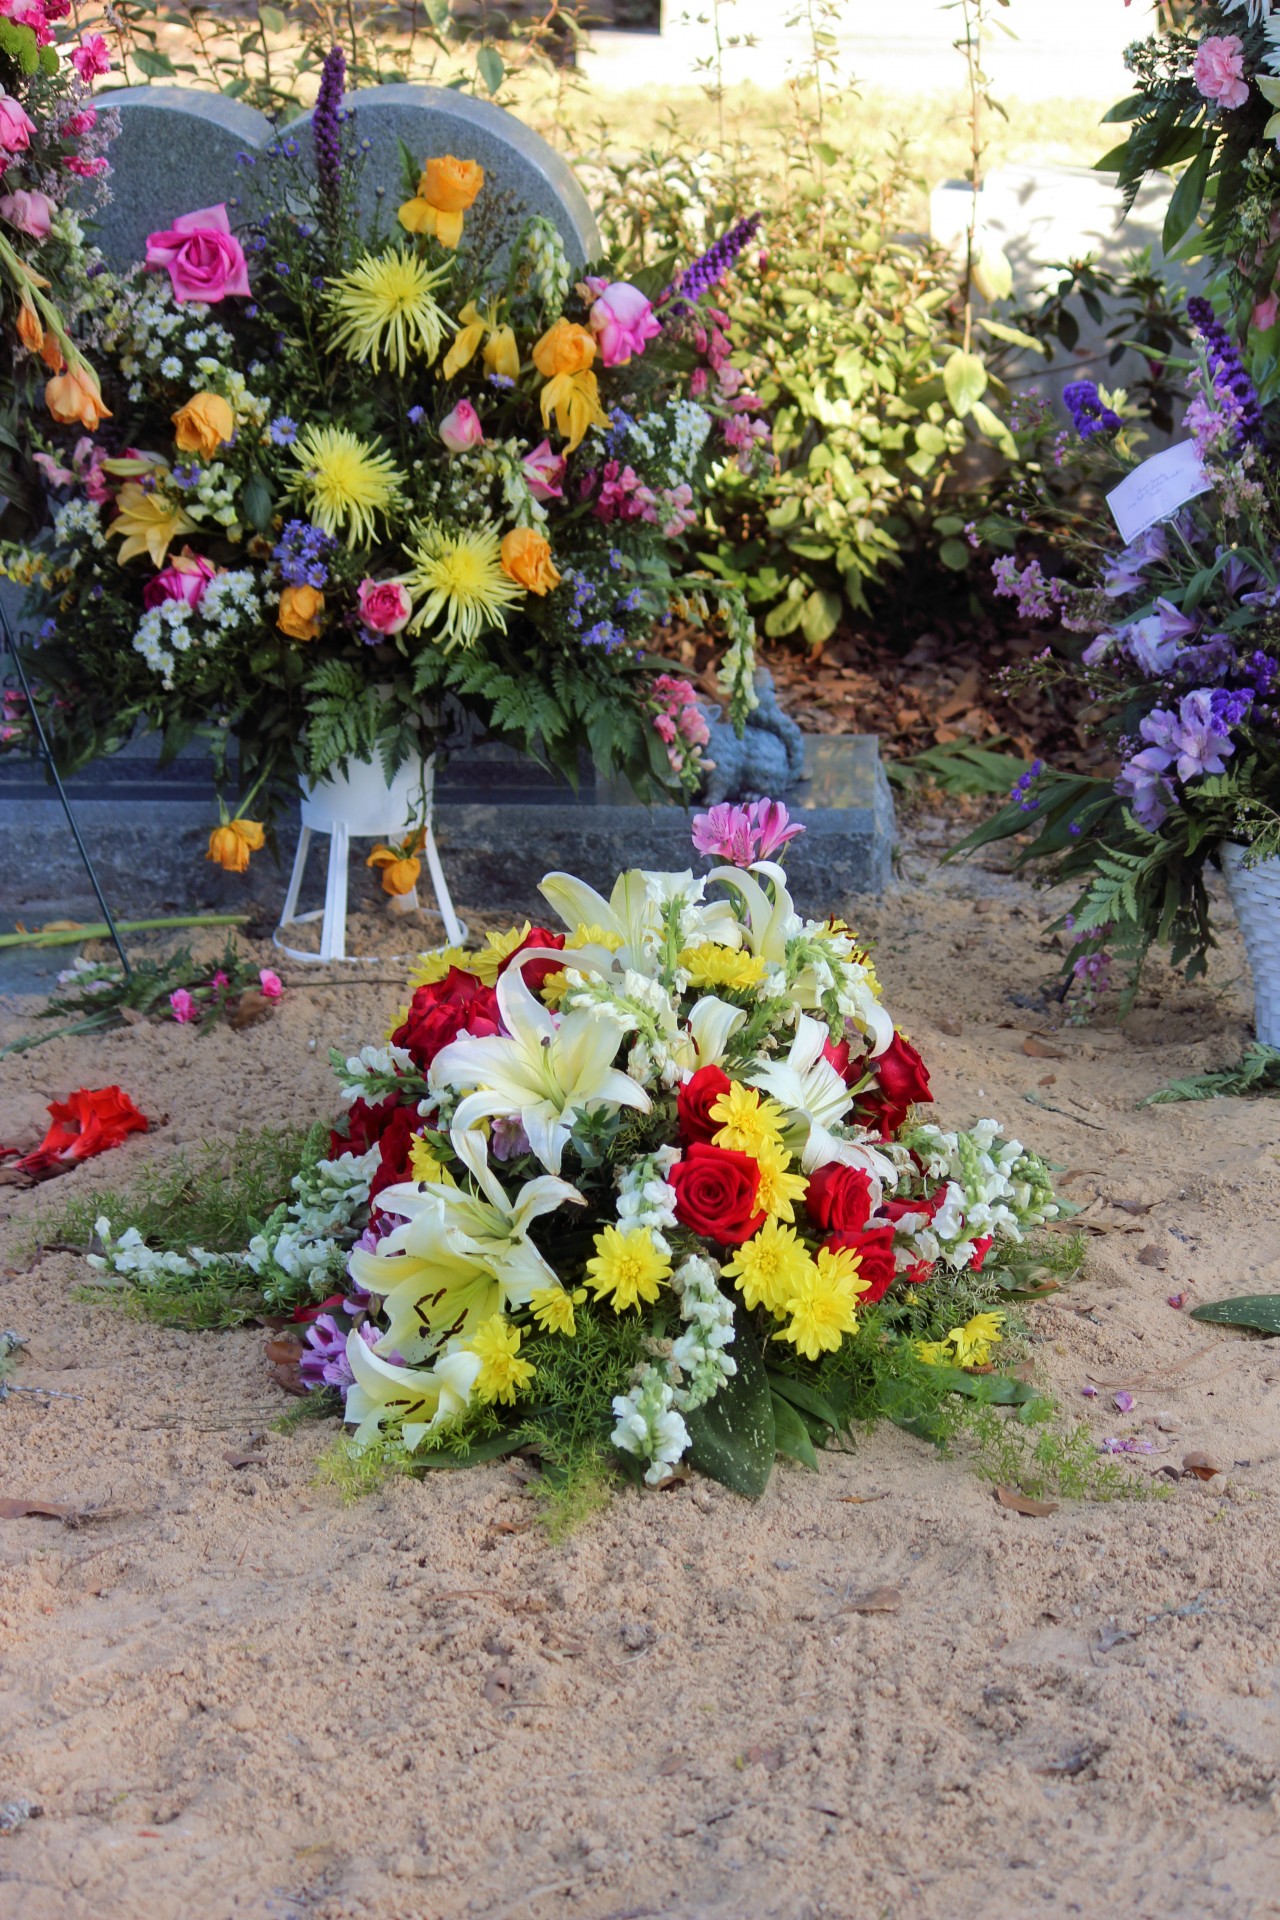 A recent grave site with the dirt freshly piled, and the burial flowers on top.